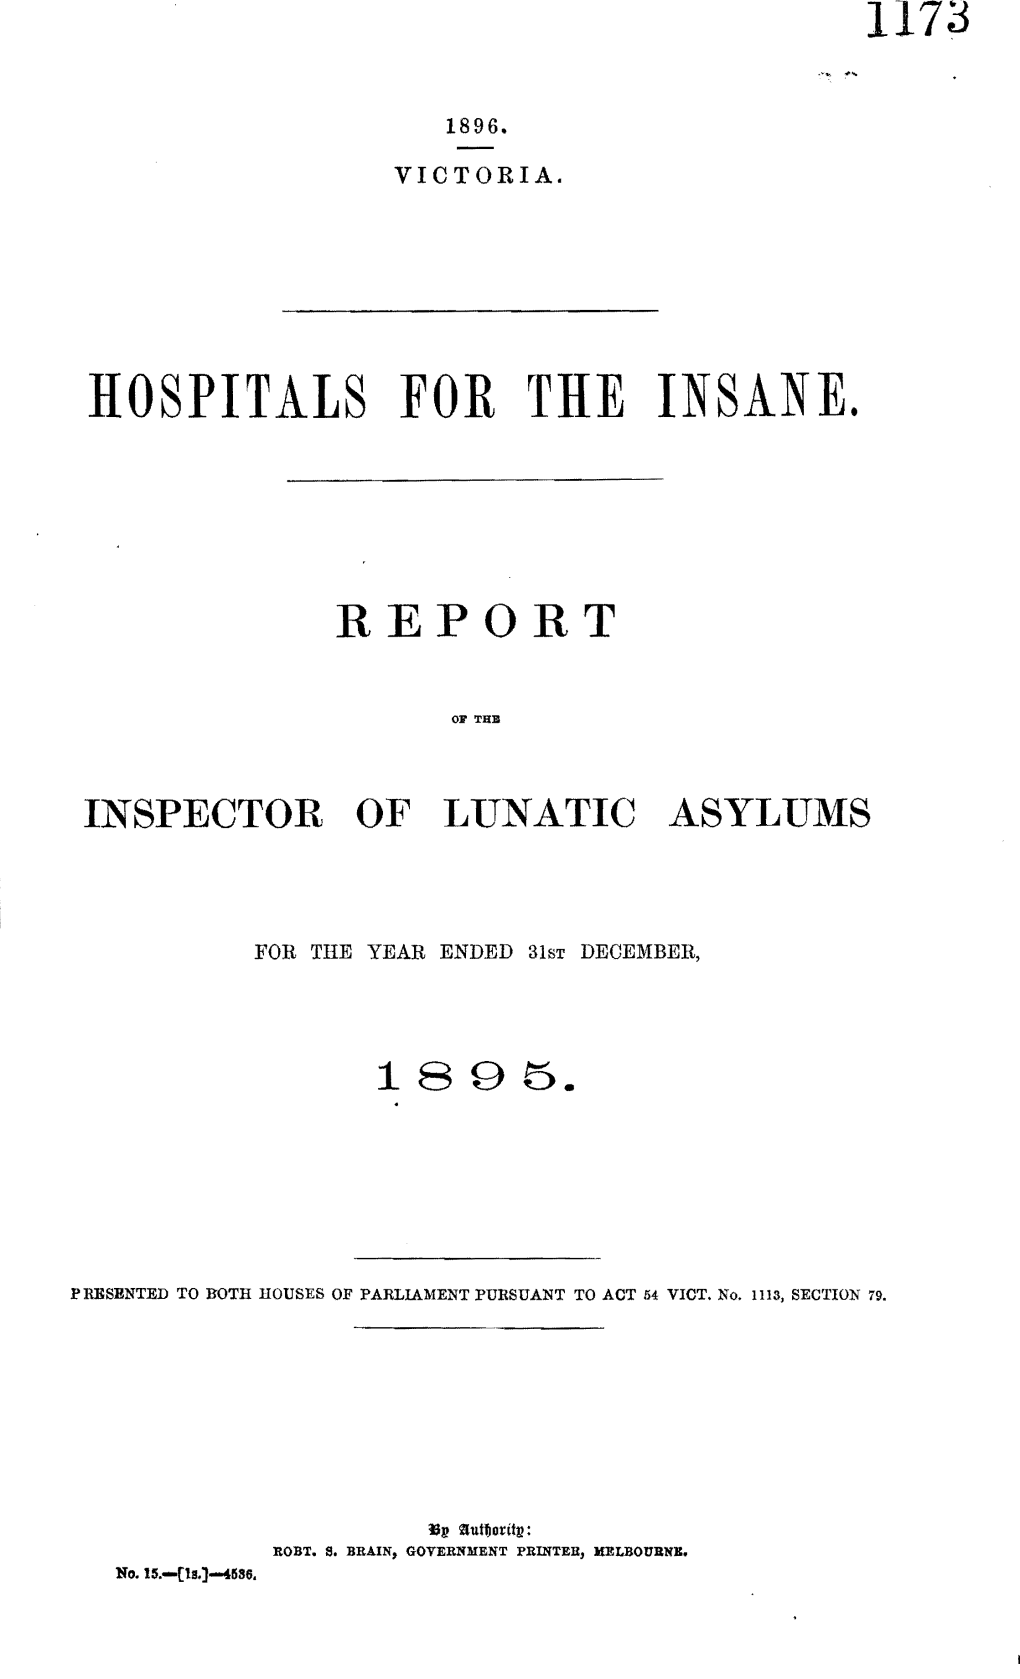 Hospitals for the Insane